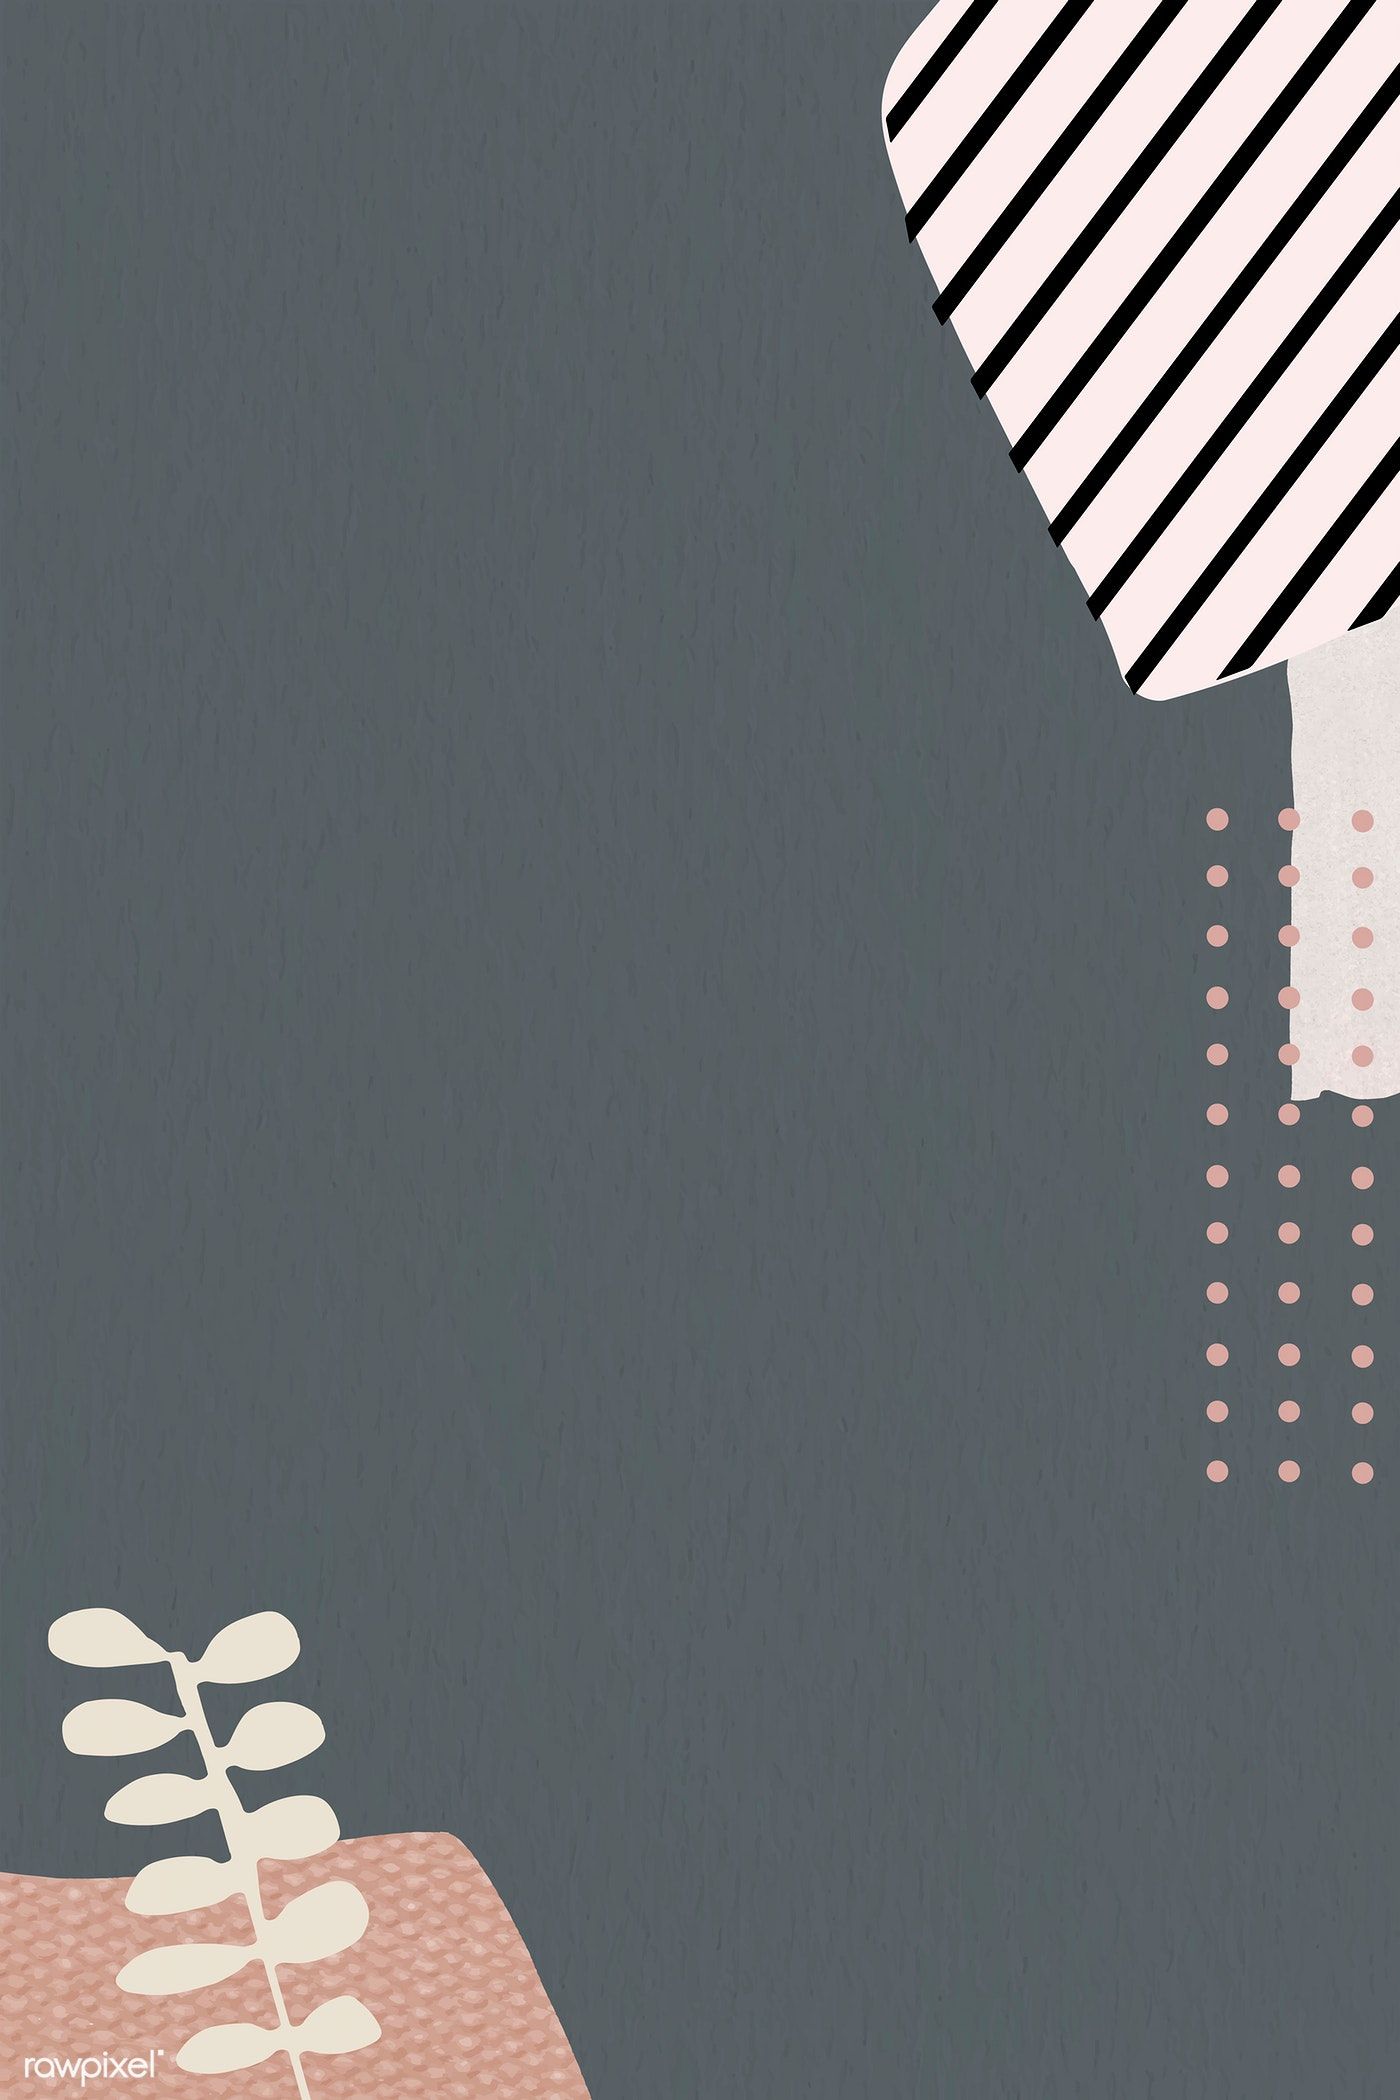 Download premium vector of Abstract shapes on a gray background - Design